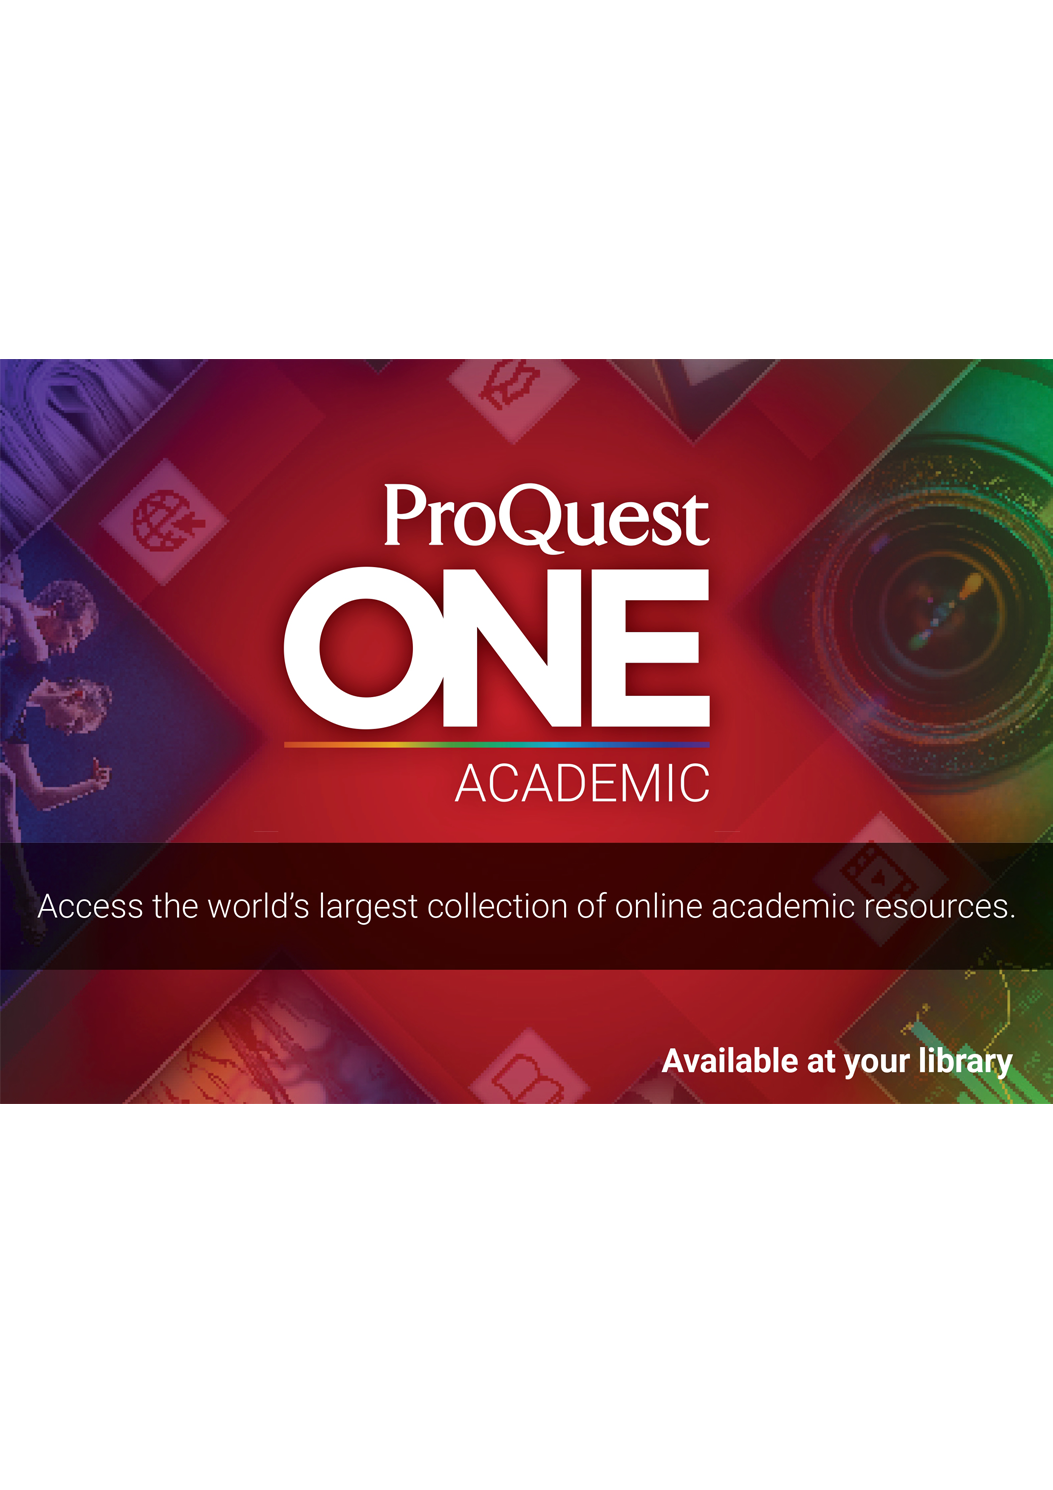 proquest one